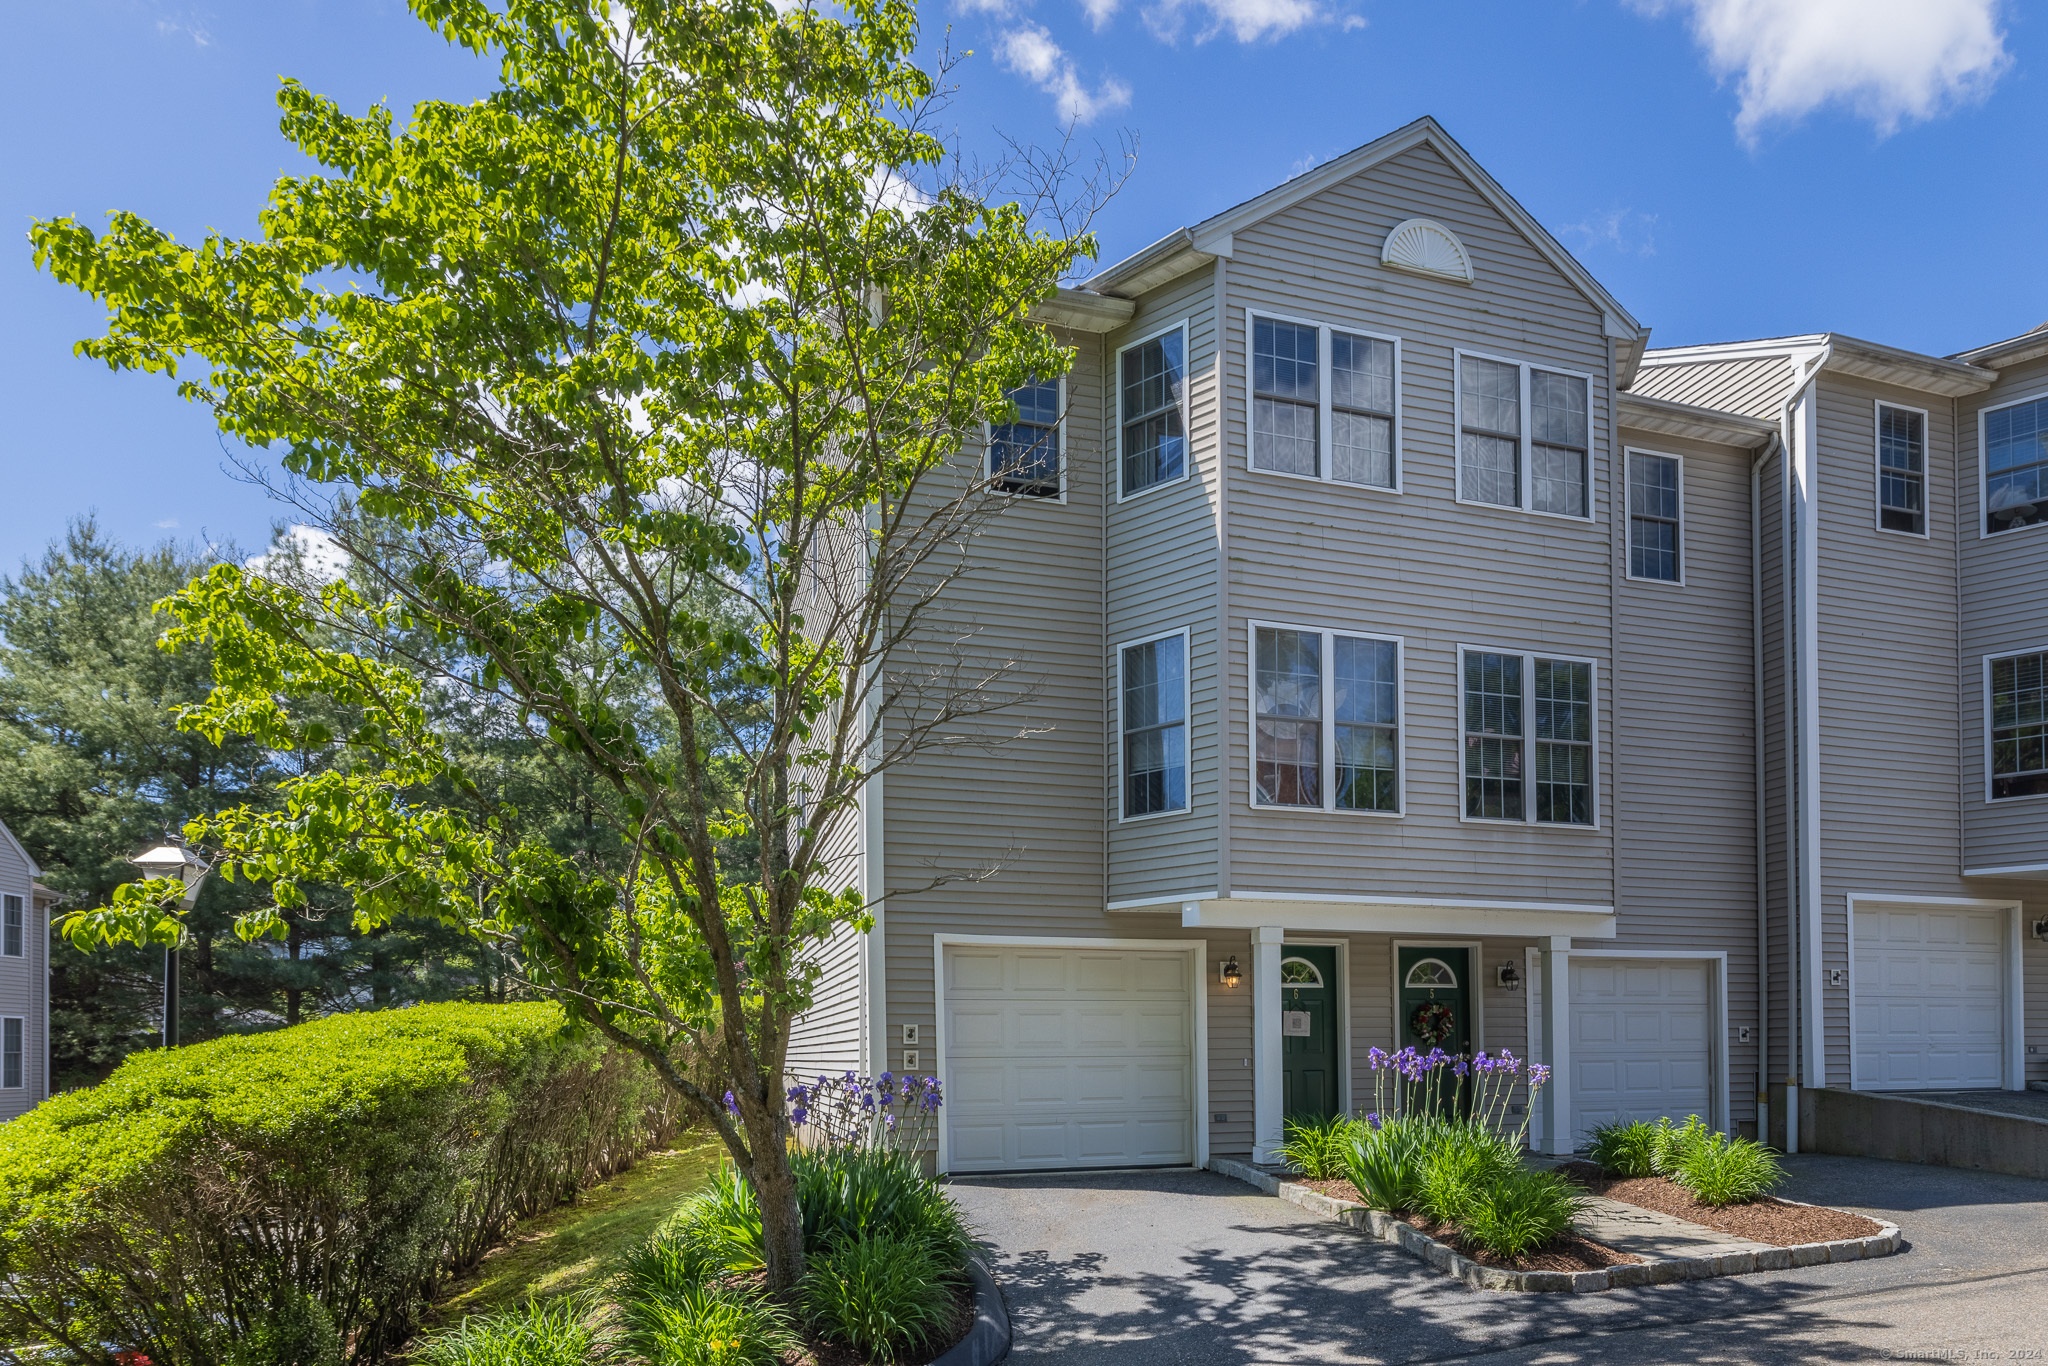 Rental Property at 60 Grove Street 6, Shelton, Connecticut - Bedrooms: 2 
Bathrooms: 2 
Rooms: 4  - $2,500 MO.